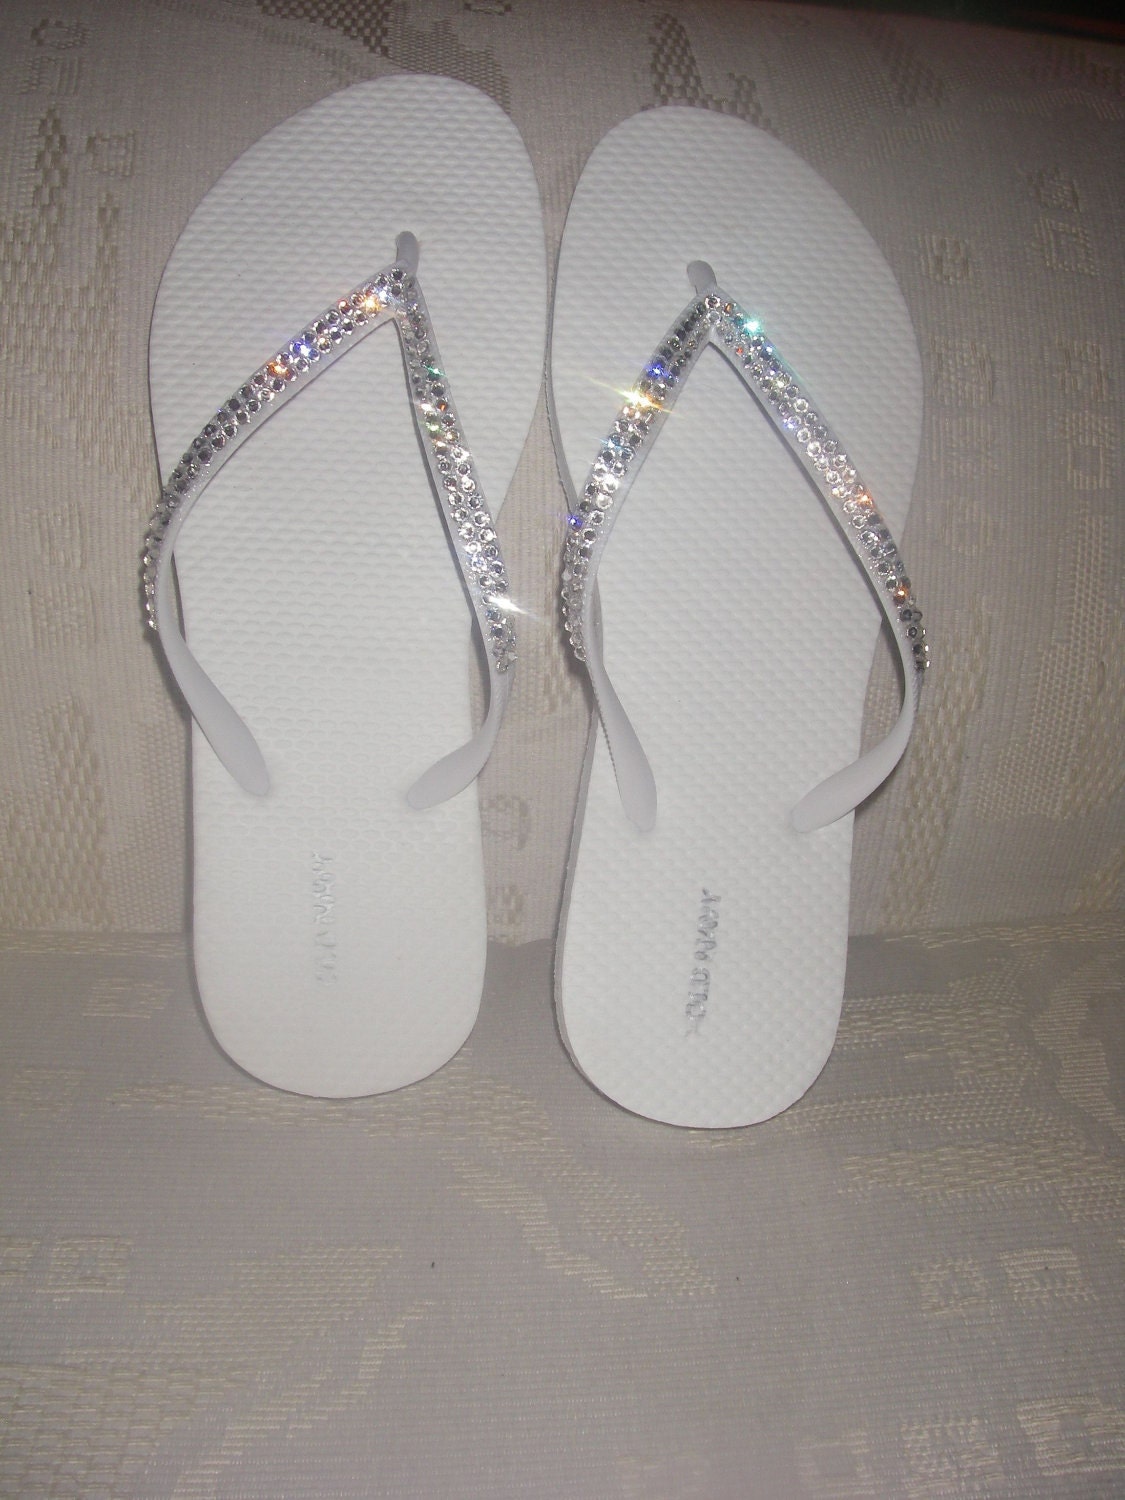 Perfect for a Wedding REAL Swarovski Crystals on White Flip